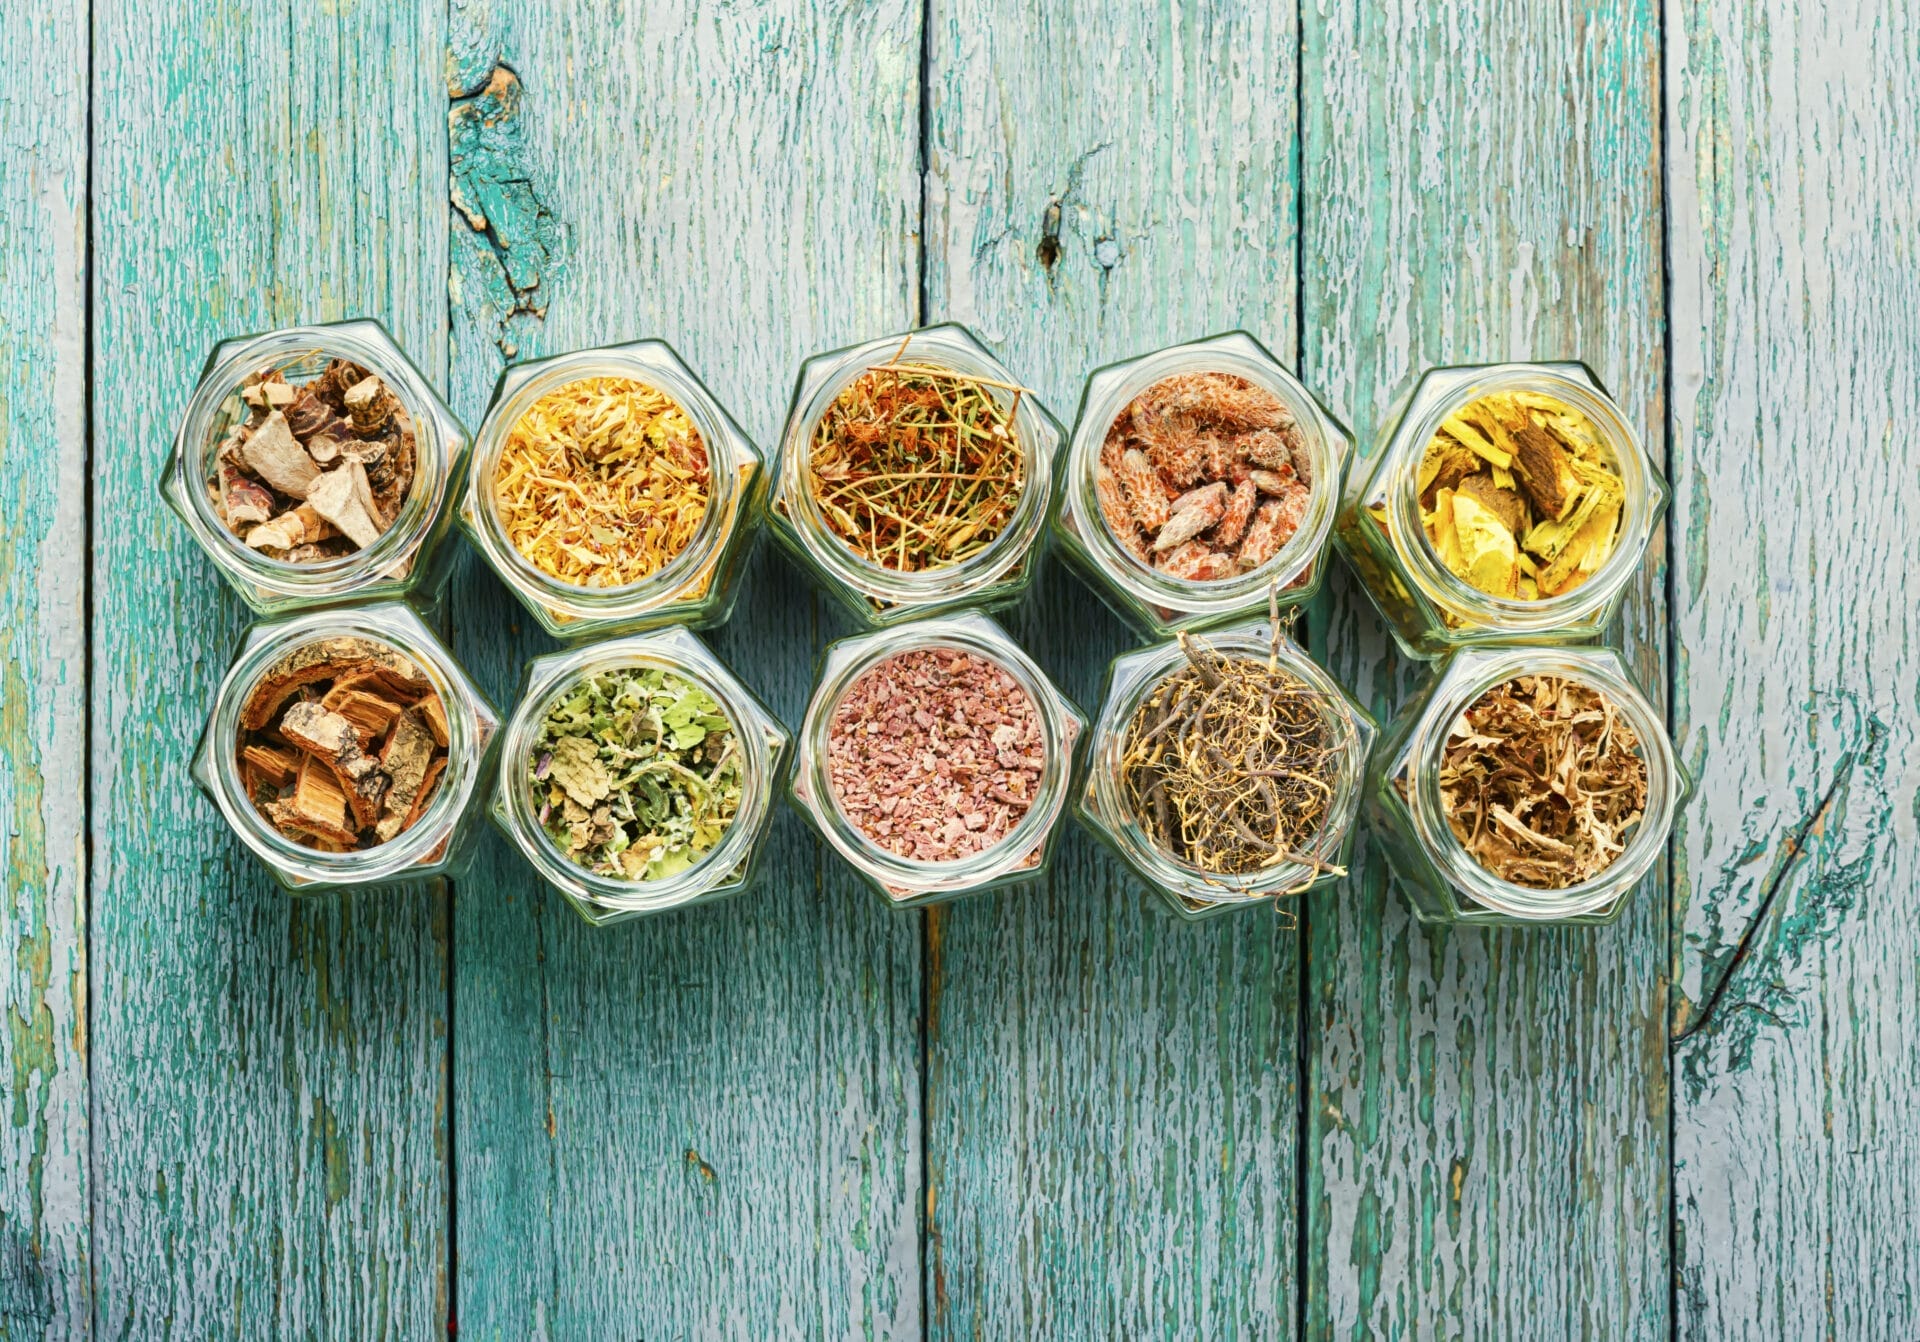 What is herbal medicine, and what is benefits?